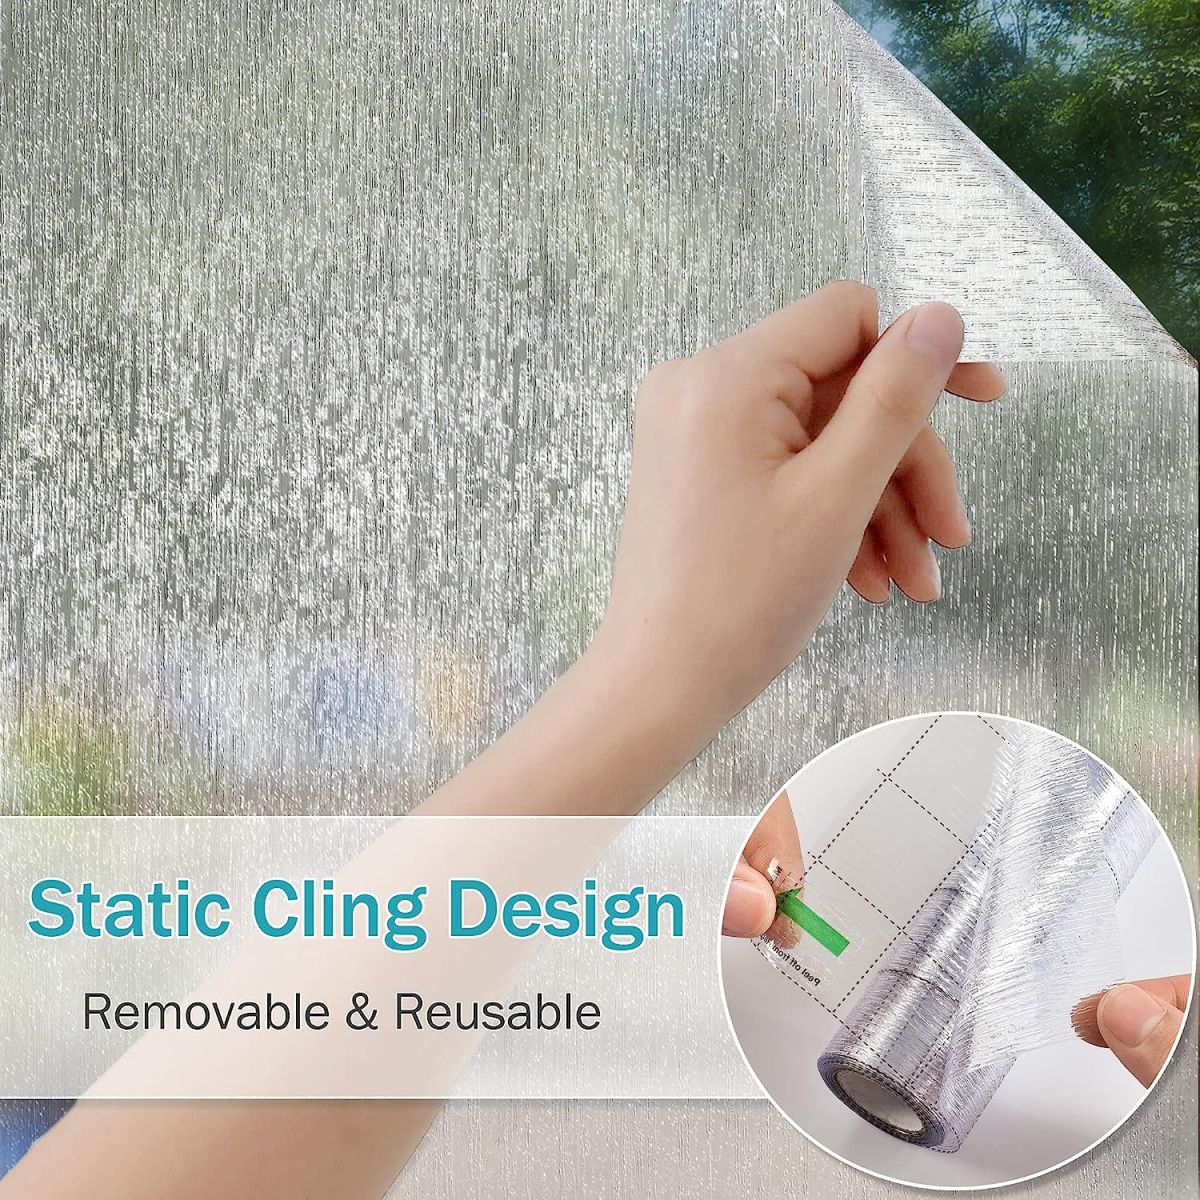 VELIMAX Rain Glass Window Film Privacy Static Window Clings Decorative Glass Sticker for Home Office Removable UV Protection Heat Control 17.7 x 78.7 inches